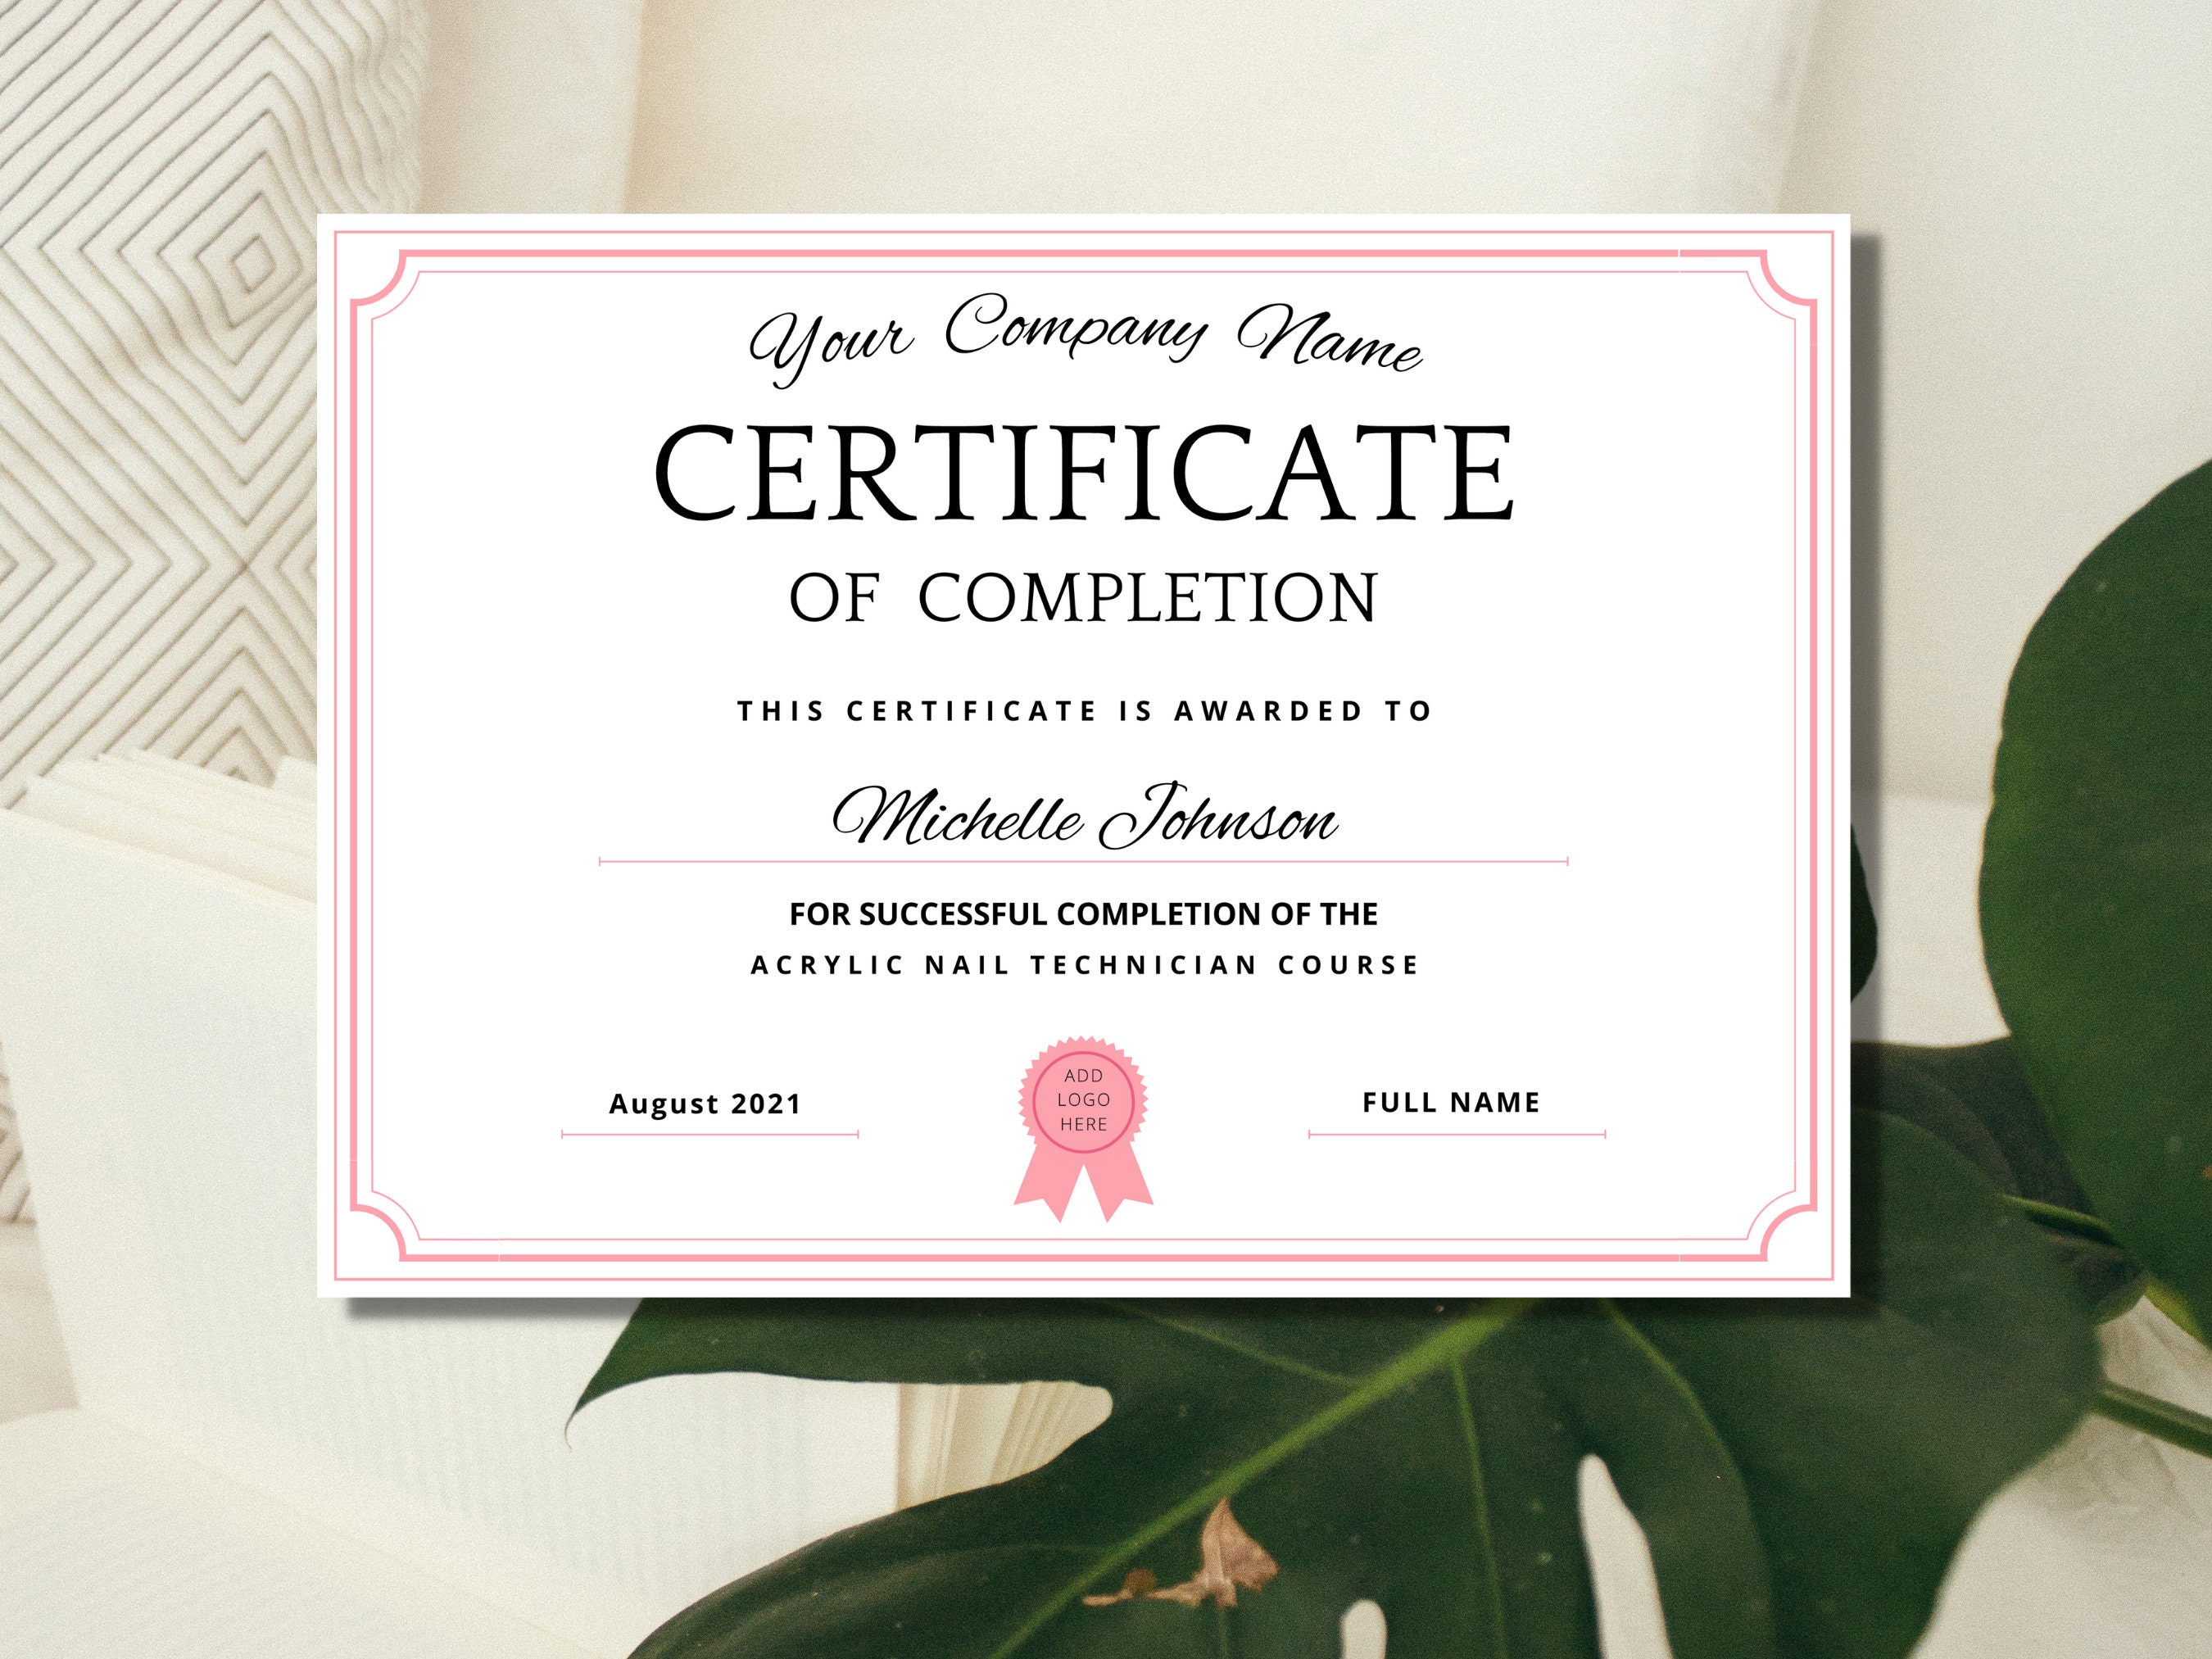 10. Nail Art Certificate of Completion - wide 3